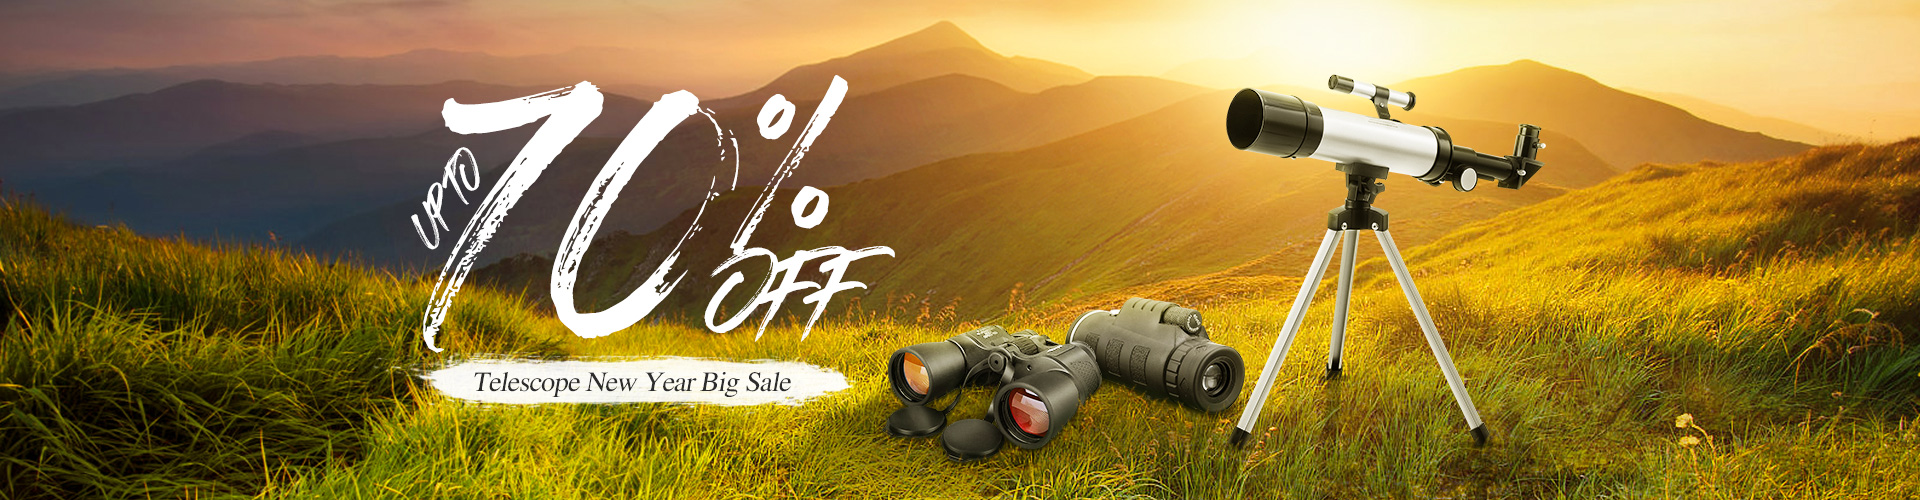 Extra 20% coupon for Telescope New Year Big Sale Display